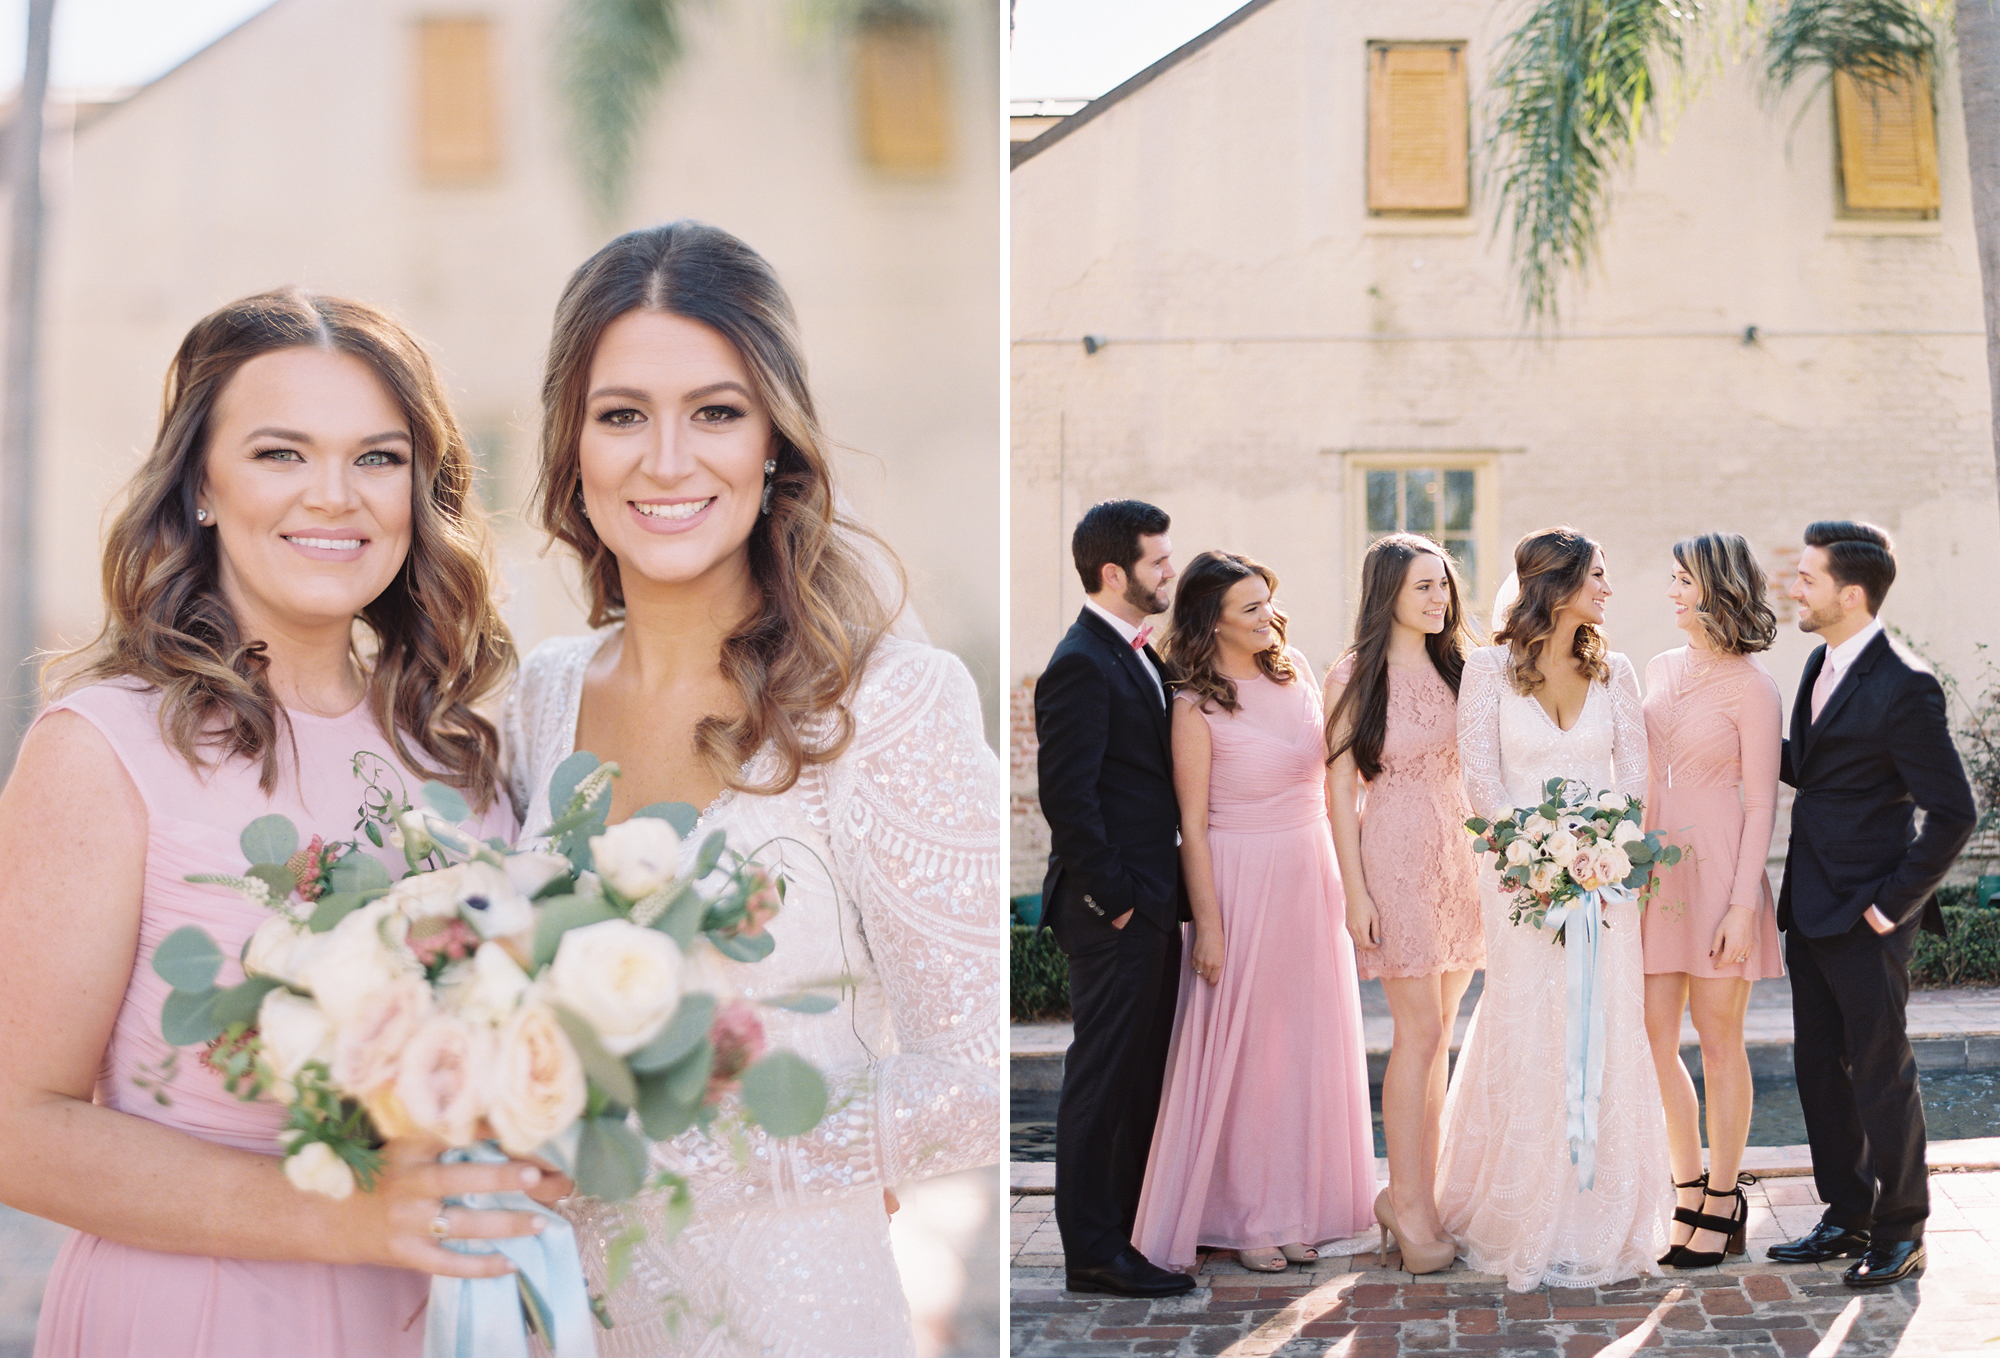 124-race_and_religious_nola_wedding - Catherine Guidry Photography